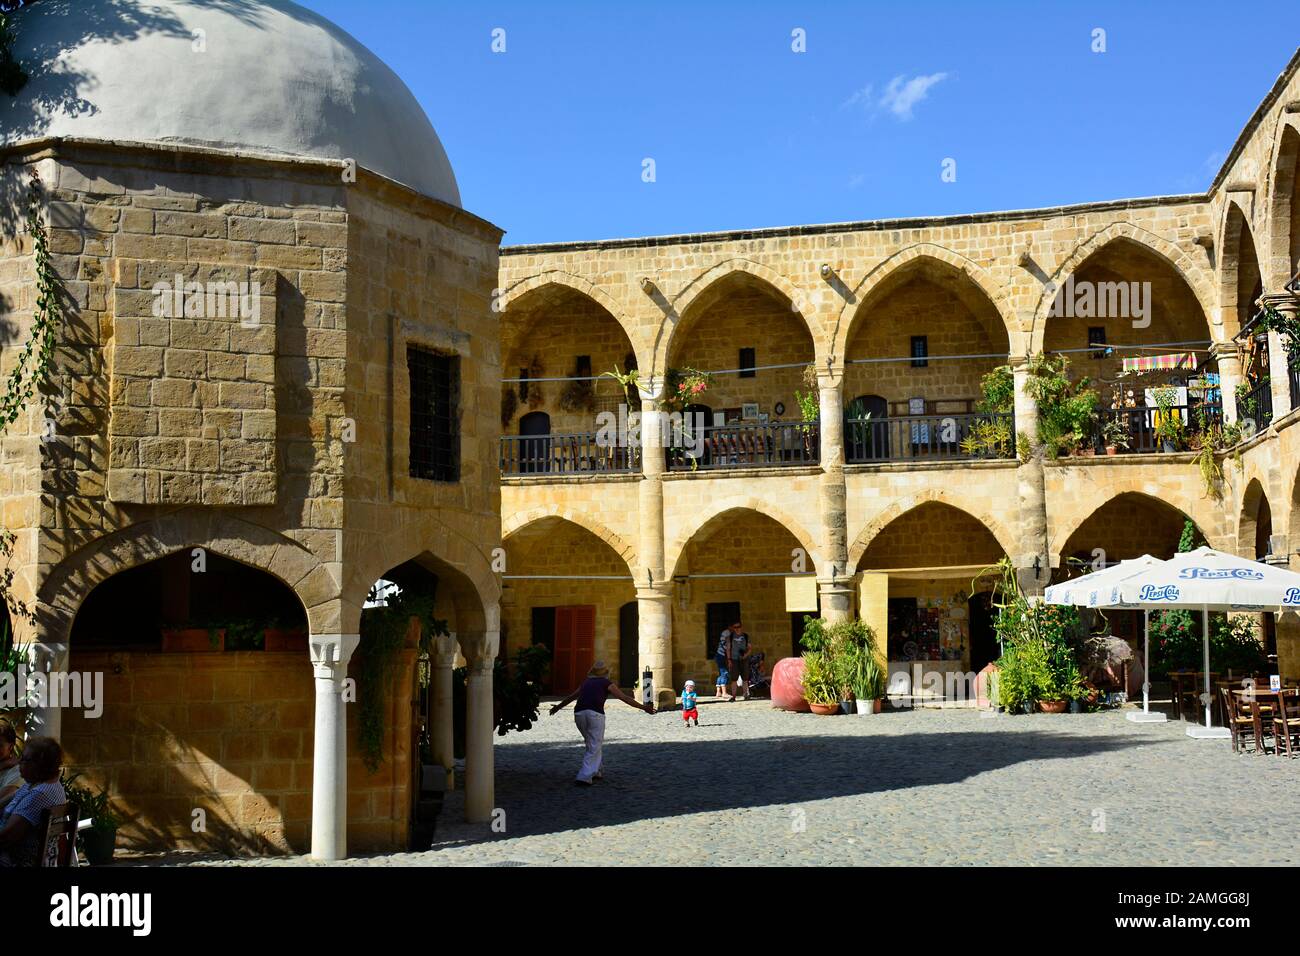 Nicosia, Cyprus - October 20th 2015: Unidentified people, shops and restaurant inside the Great Khan aka Buyuk Han building Stock Photo